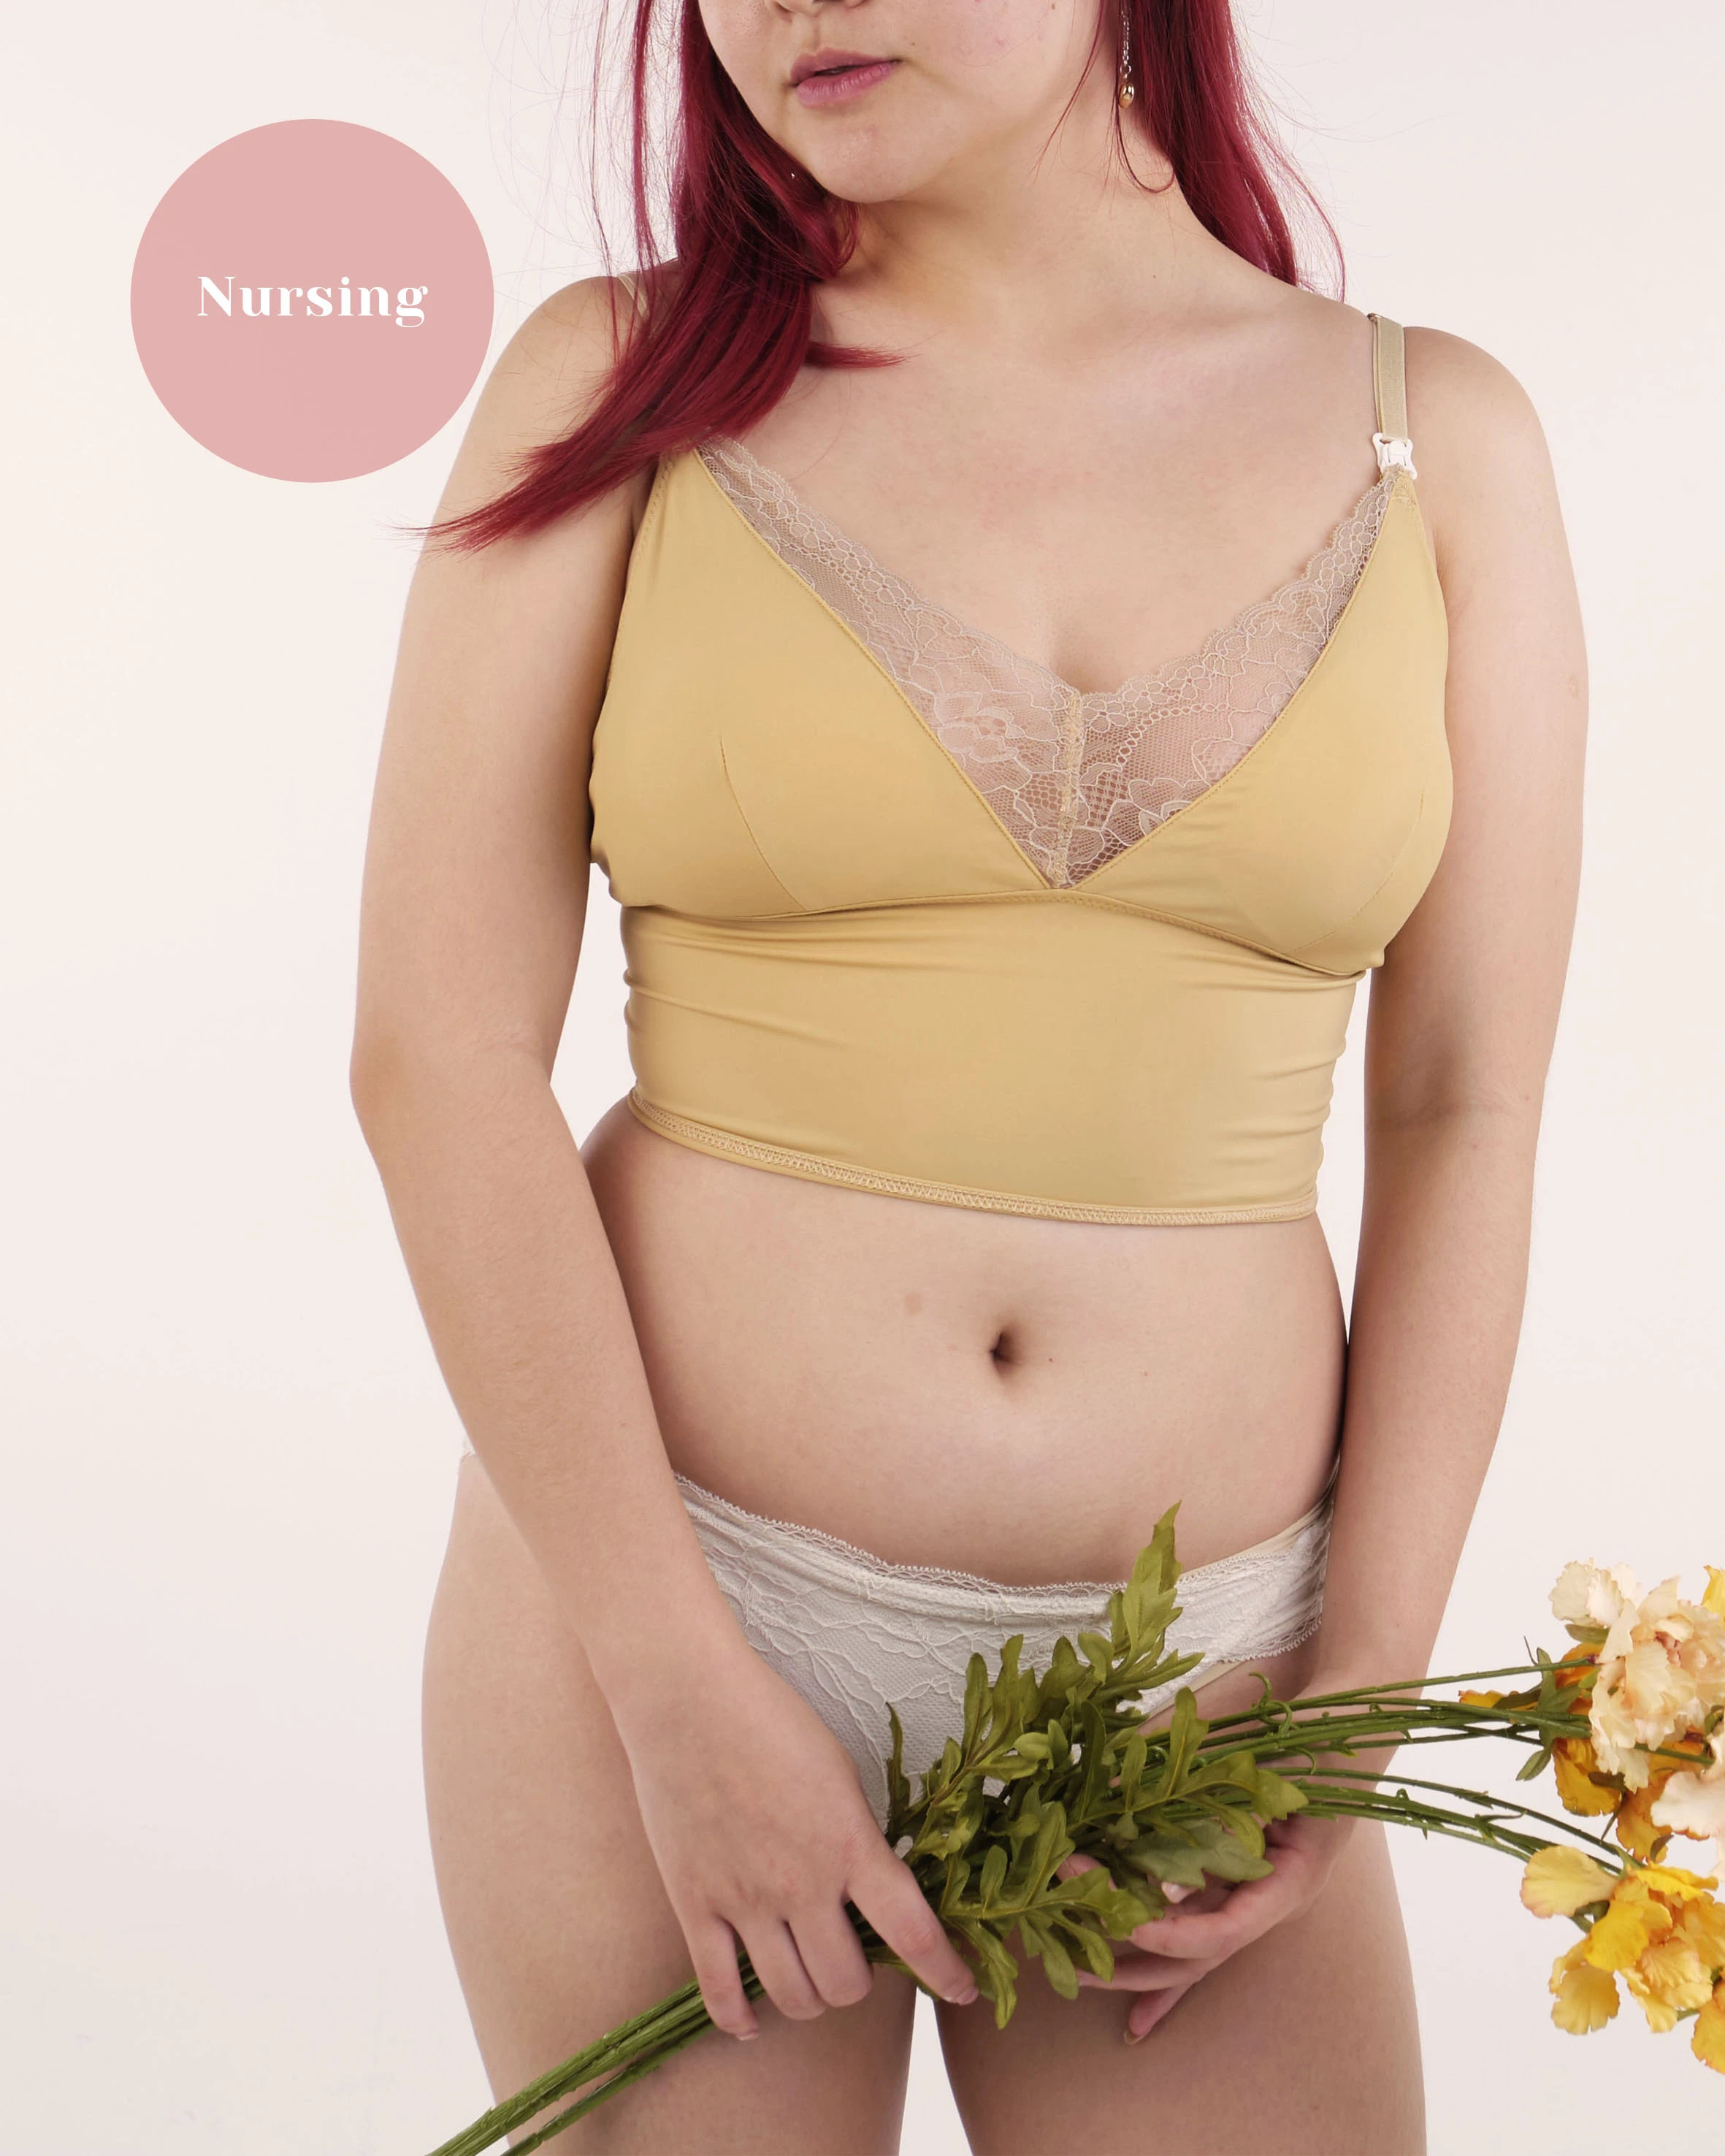 Our Bralette Club The Full Moon Padded Nursing Camisole in Granola